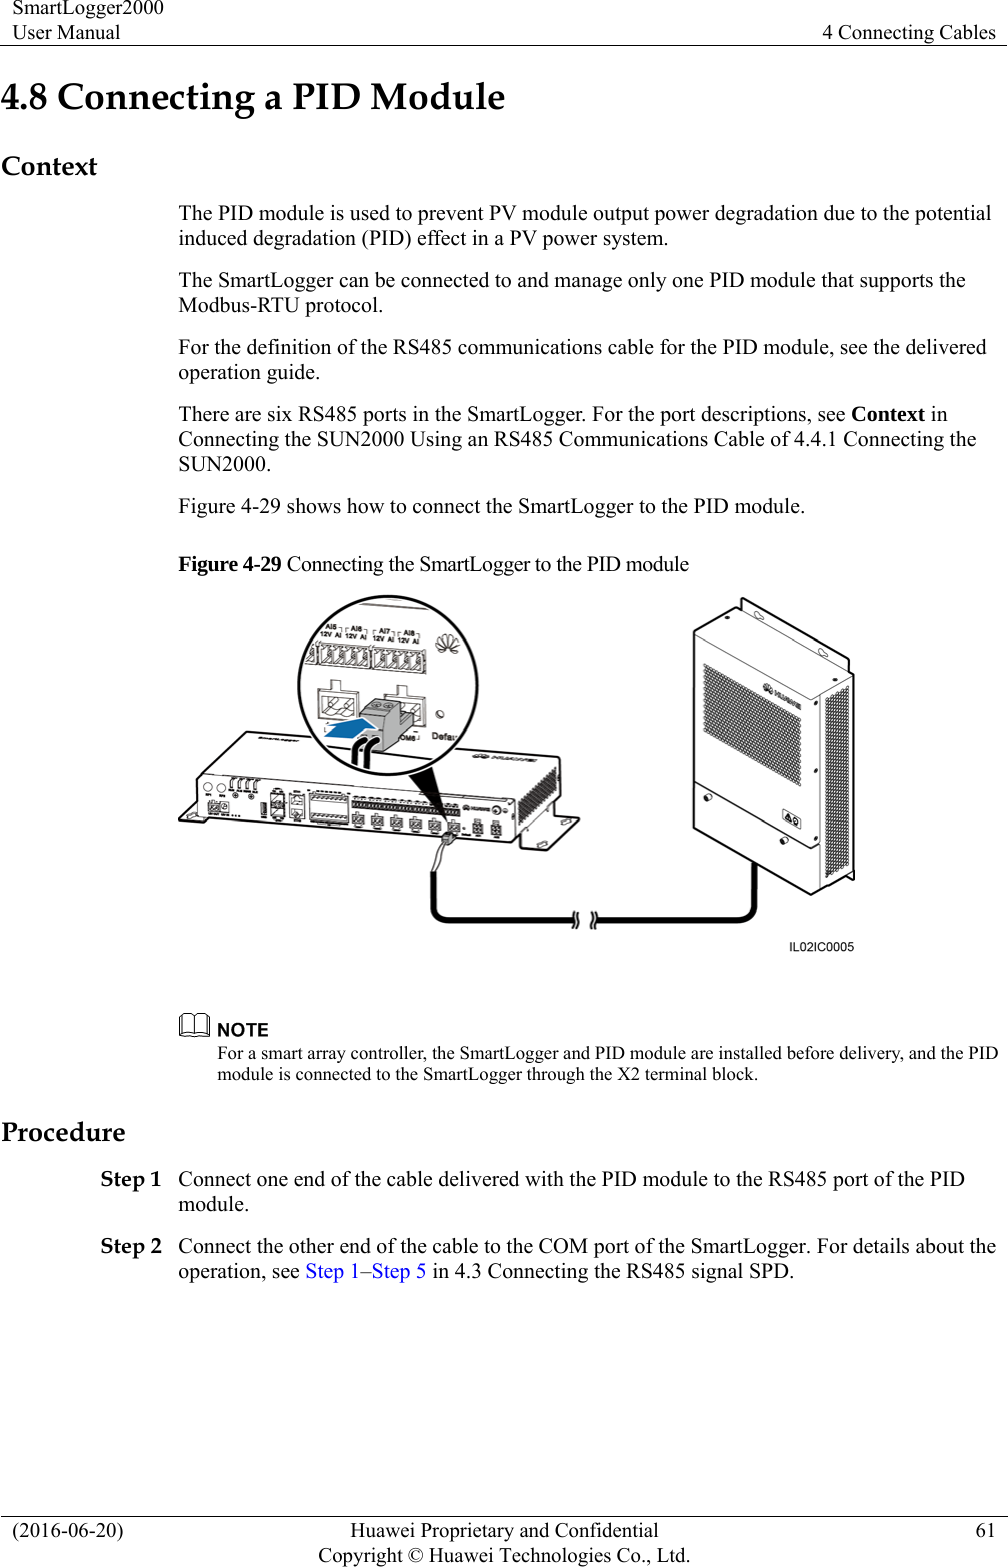 SmartLogger2000 User Manual  4 Connecting Cables (2016-06-20)  Huawei Proprietary and Confidential         Copyright © Huawei Technologies Co., Ltd.61 4.8 Connecting a PID Module Context The PID module is used to prevent PV module output power degradation due to the potential induced degradation (PID) effect in a PV power system.   The SmartLogger can be connected to and manage only one PID module that supports the Modbus-RTU protocol.   For the definition of the RS485 communications cable for the PID module, see the delivered operation guide. There are six RS485 ports in the SmartLogger. For the port descriptions, see Context in Connecting the SUN2000 Using an RS485 Communications Cable of 4.4.1 Connecting the SUN2000. Figure 4-29 shows how to connect the SmartLogger to the PID module. Figure 4-29 Connecting the SmartLogger to the PID module    For a smart array controller, the SmartLogger and PID module are installed before delivery, and the PID module is connected to the SmartLogger through the X2 terminal block. Procedure Step 1 Connect one end of the cable delivered with the PID module to the RS485 port of the PID module.  Step 2 Connect the other end of the cable to the COM port of the SmartLogger. For details about the operation, see Step 1–Step 5 in 4.3 Connecting the RS485 signal SPD.  